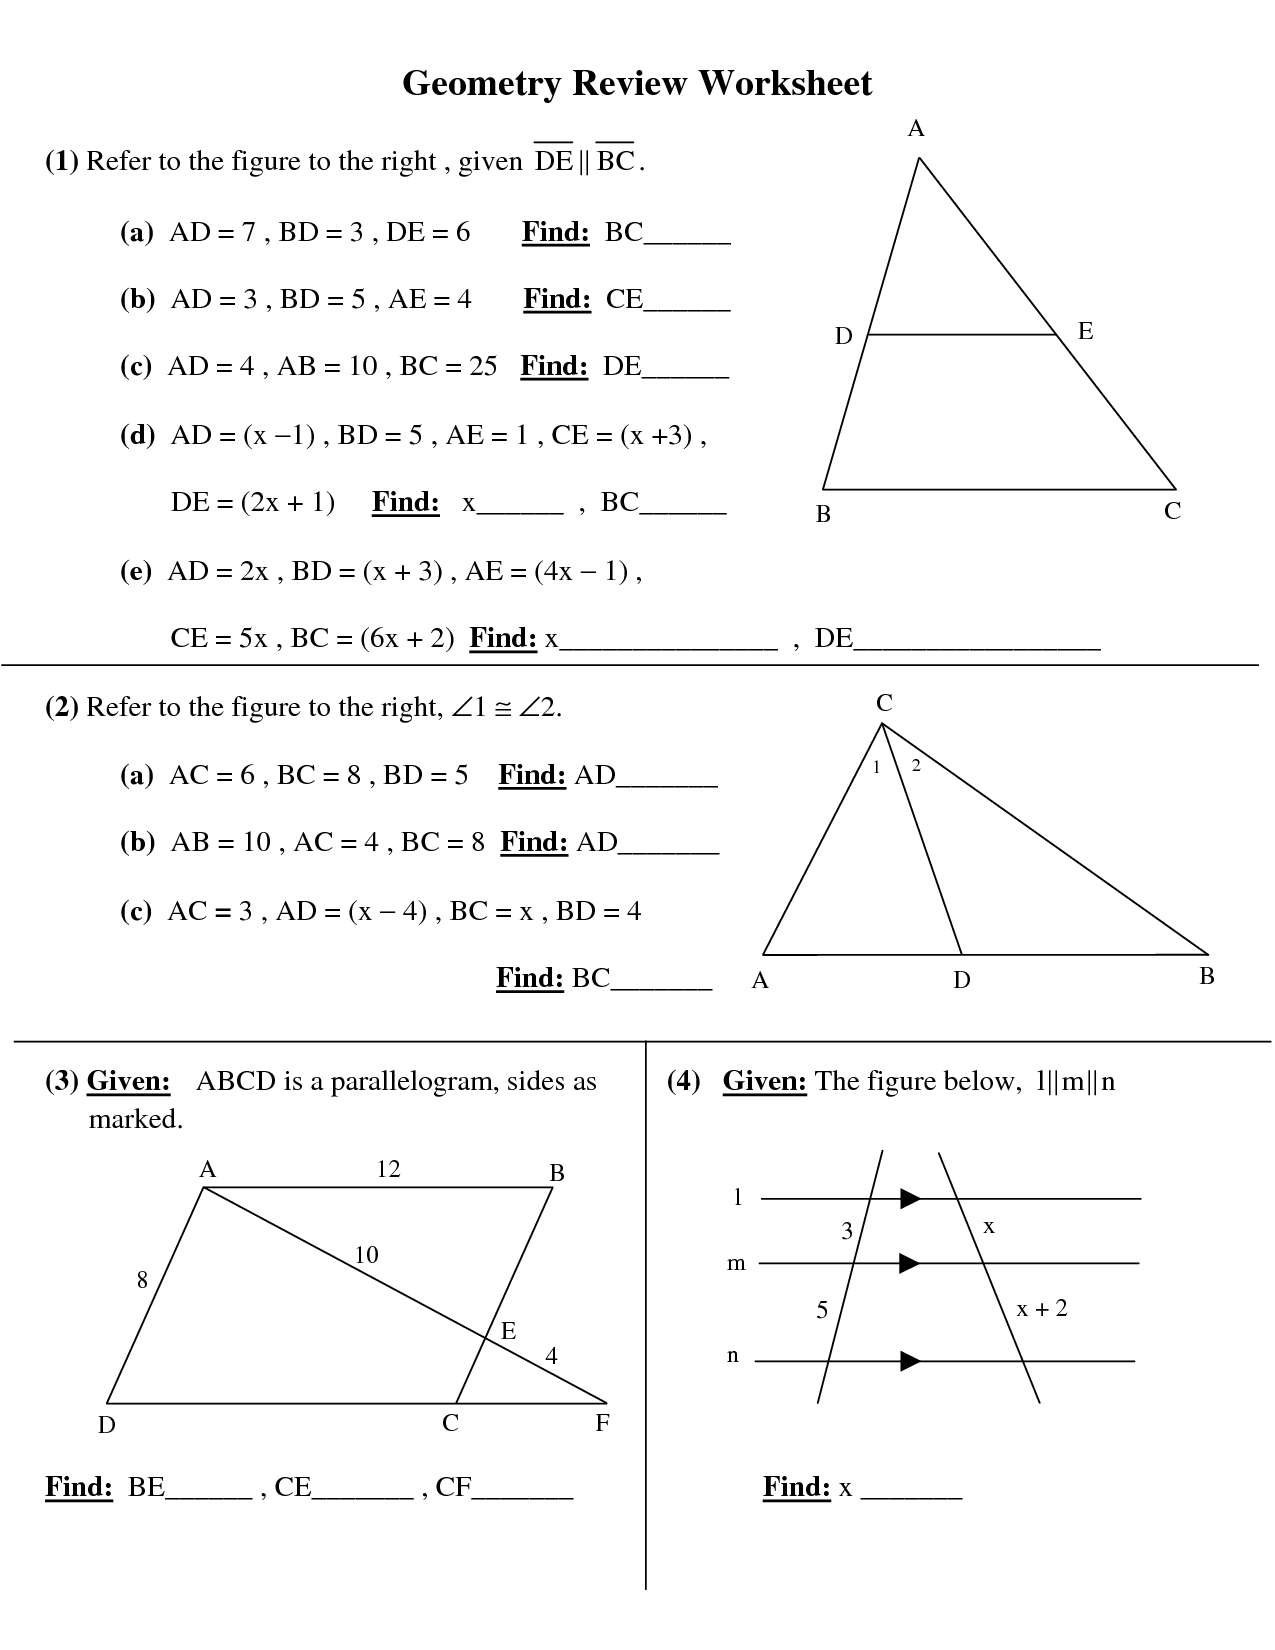 7 Best Images of 10th Grade Geometry Worksheets Printable 10th Grade